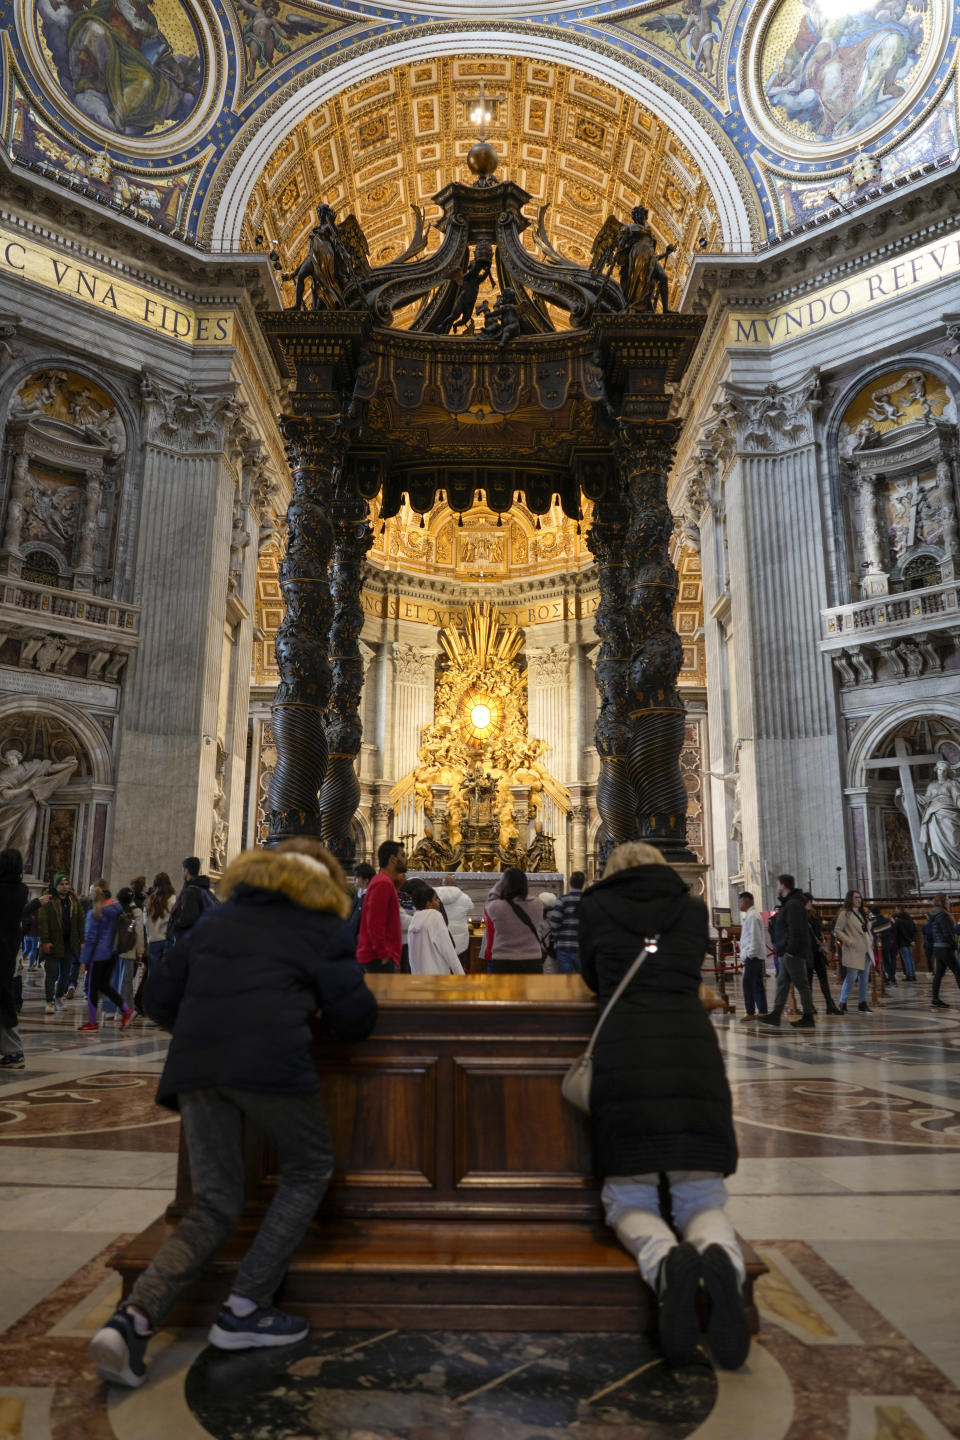 People pray in front of the 17th century, 95ft-tall bronze canopy by Giovan Lorenzo Bernini surmounting the papal Altar of the Confession in St. Peter's Basilica at the Vatican, Wednesday, Jan. 10, 2024. Vatican officials unveiled plans Thursday, Jan.11, for a year-long, 700,000 euro restoration of the monumental baldacchino, or canopy, of St. Peter's Basilica, pledging to complete the first comprehensive work on Bernini's masterpiece in 250 years before Pope Francis' big 2025 Jubilee. (AP Photo/Andrew Medichini)